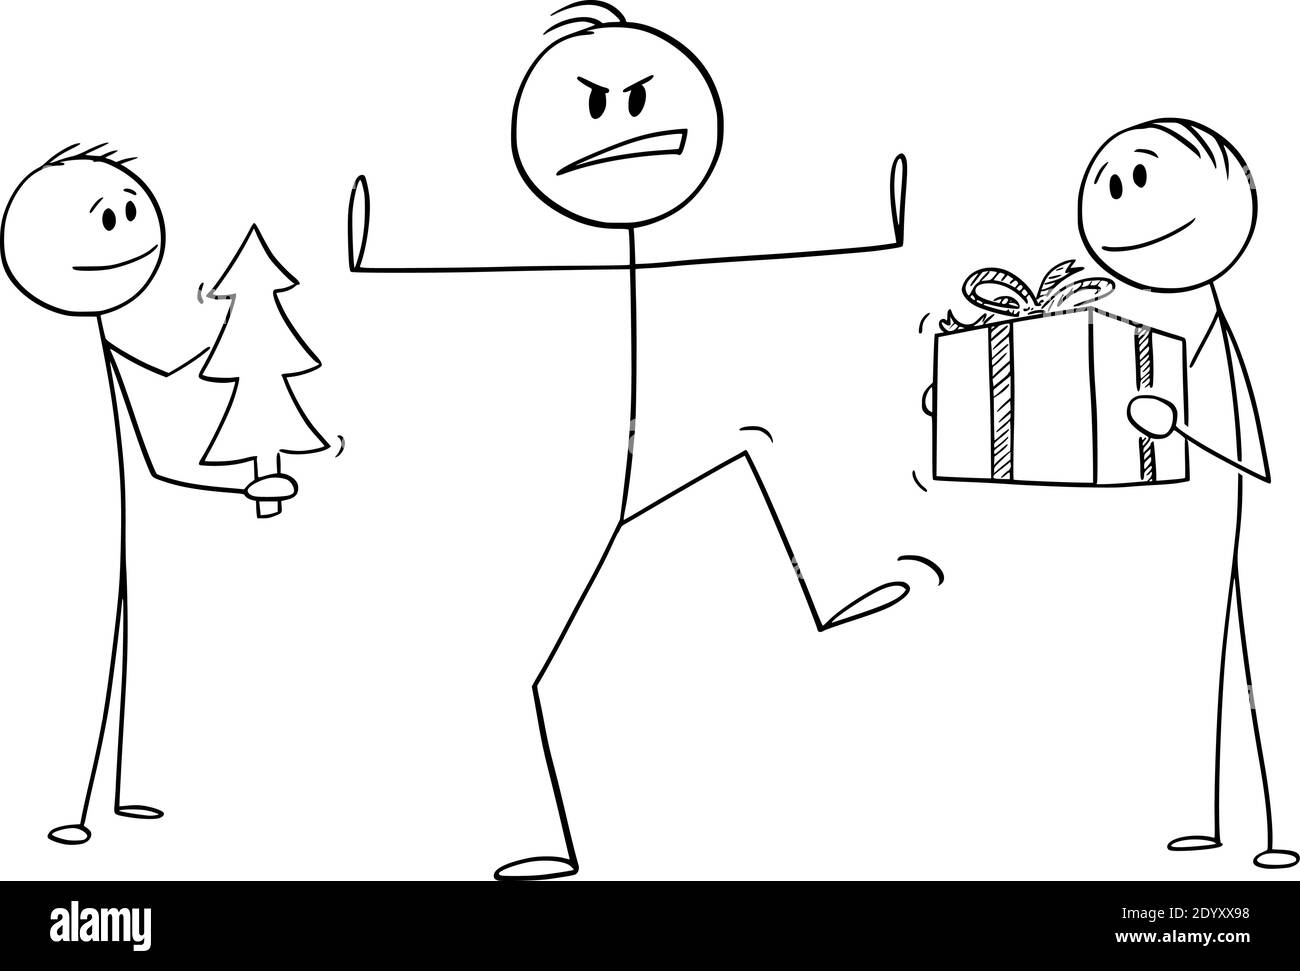 Vector cartoon stick figure illustration of man rejecting Christmas tree and gift. Stock Vector